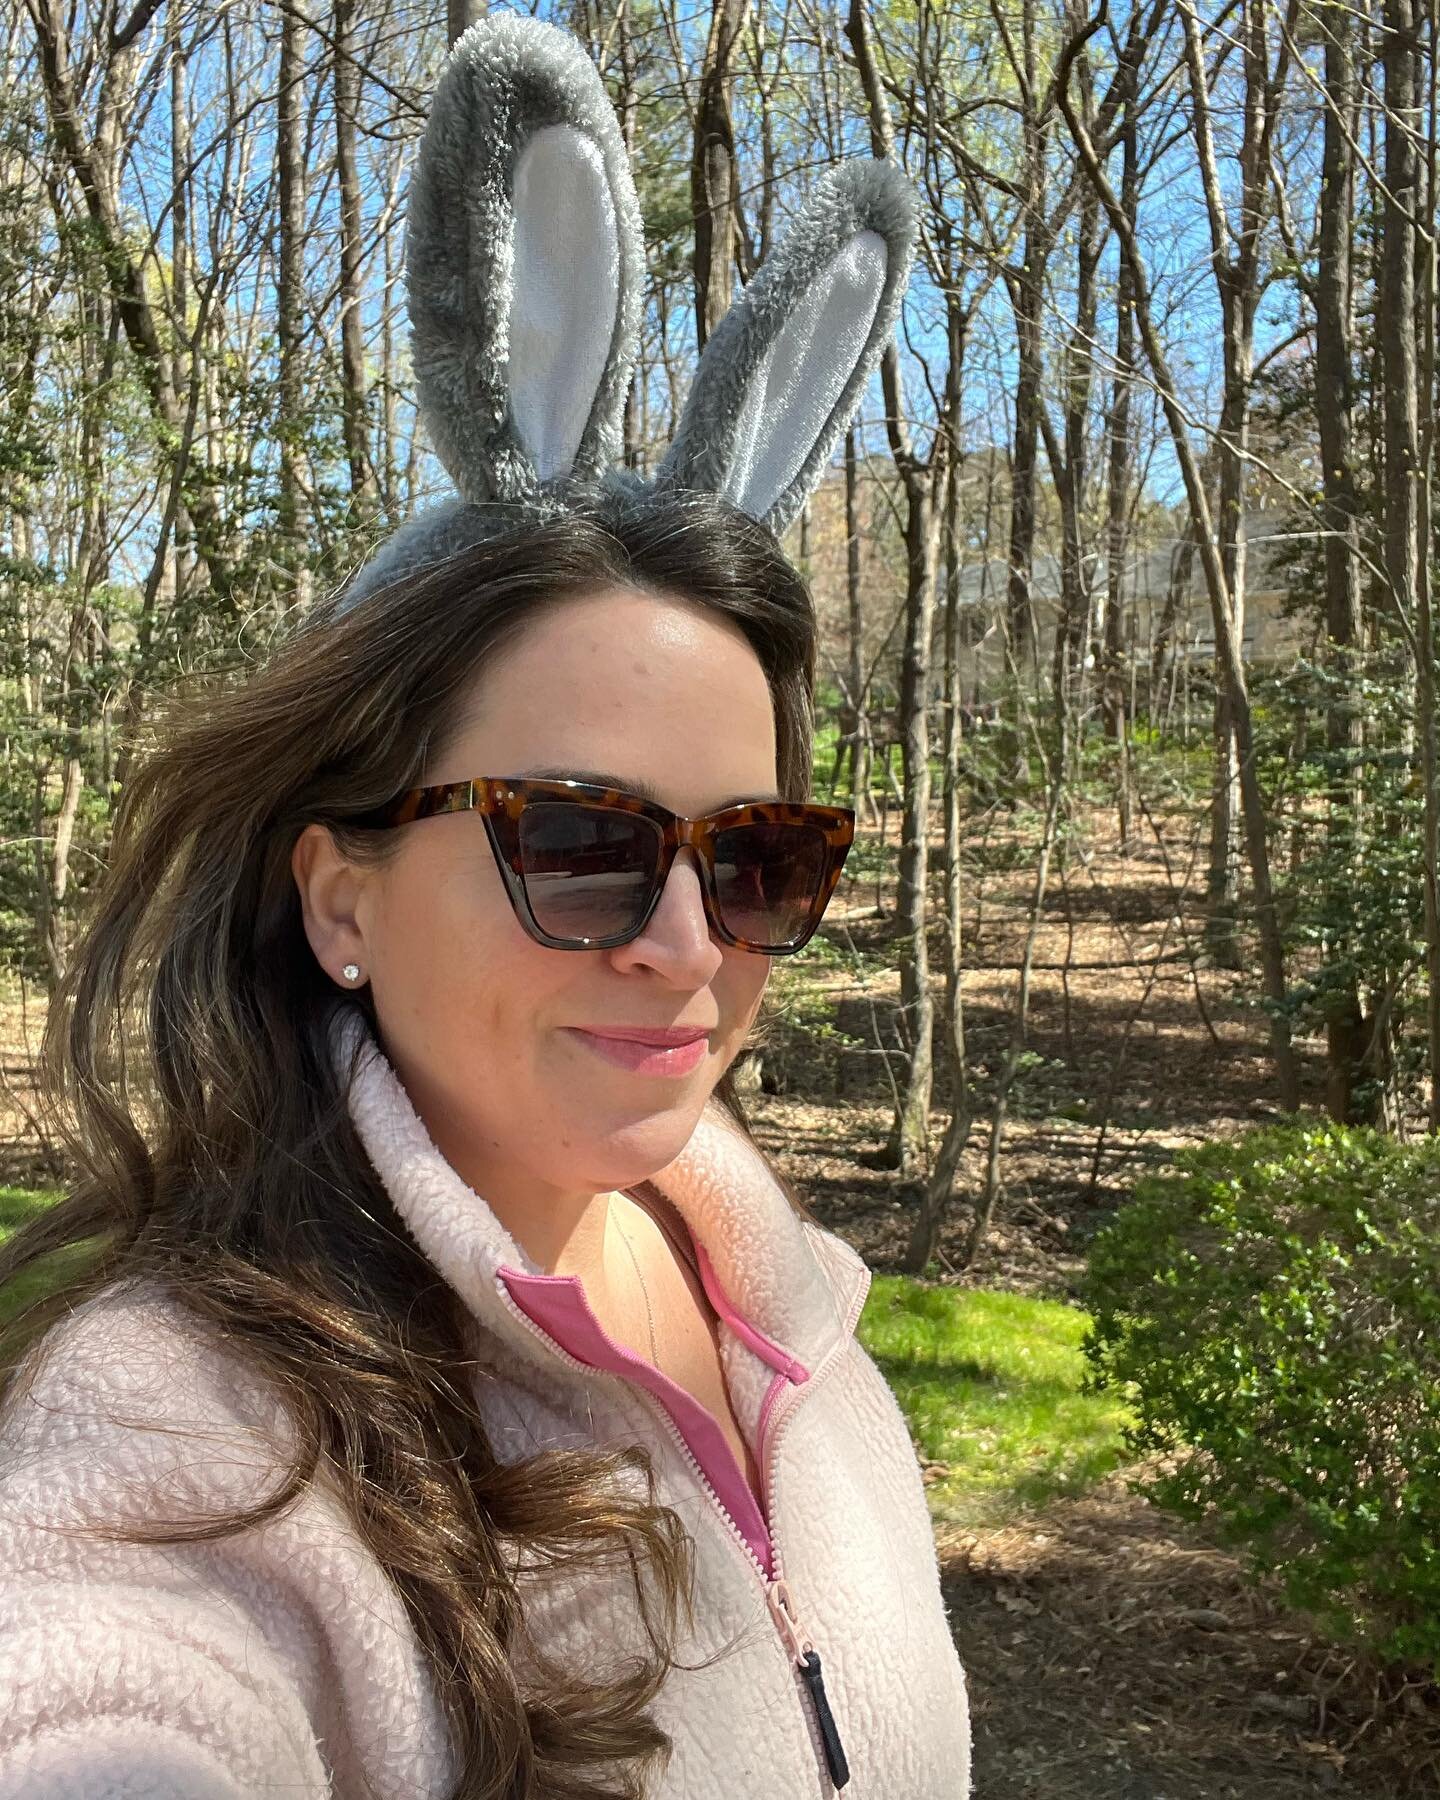 Hop hop hopping to run the neighborhood egg hunt. Ty to my helpers, we probably hid 1,000 eggs!🥚 Joe was a spirited Easter Bunny 🐇 Our littlest was not amused but Benny was a fan. The first pic of the carousel is dedicated to my good hair day 💅🏼 